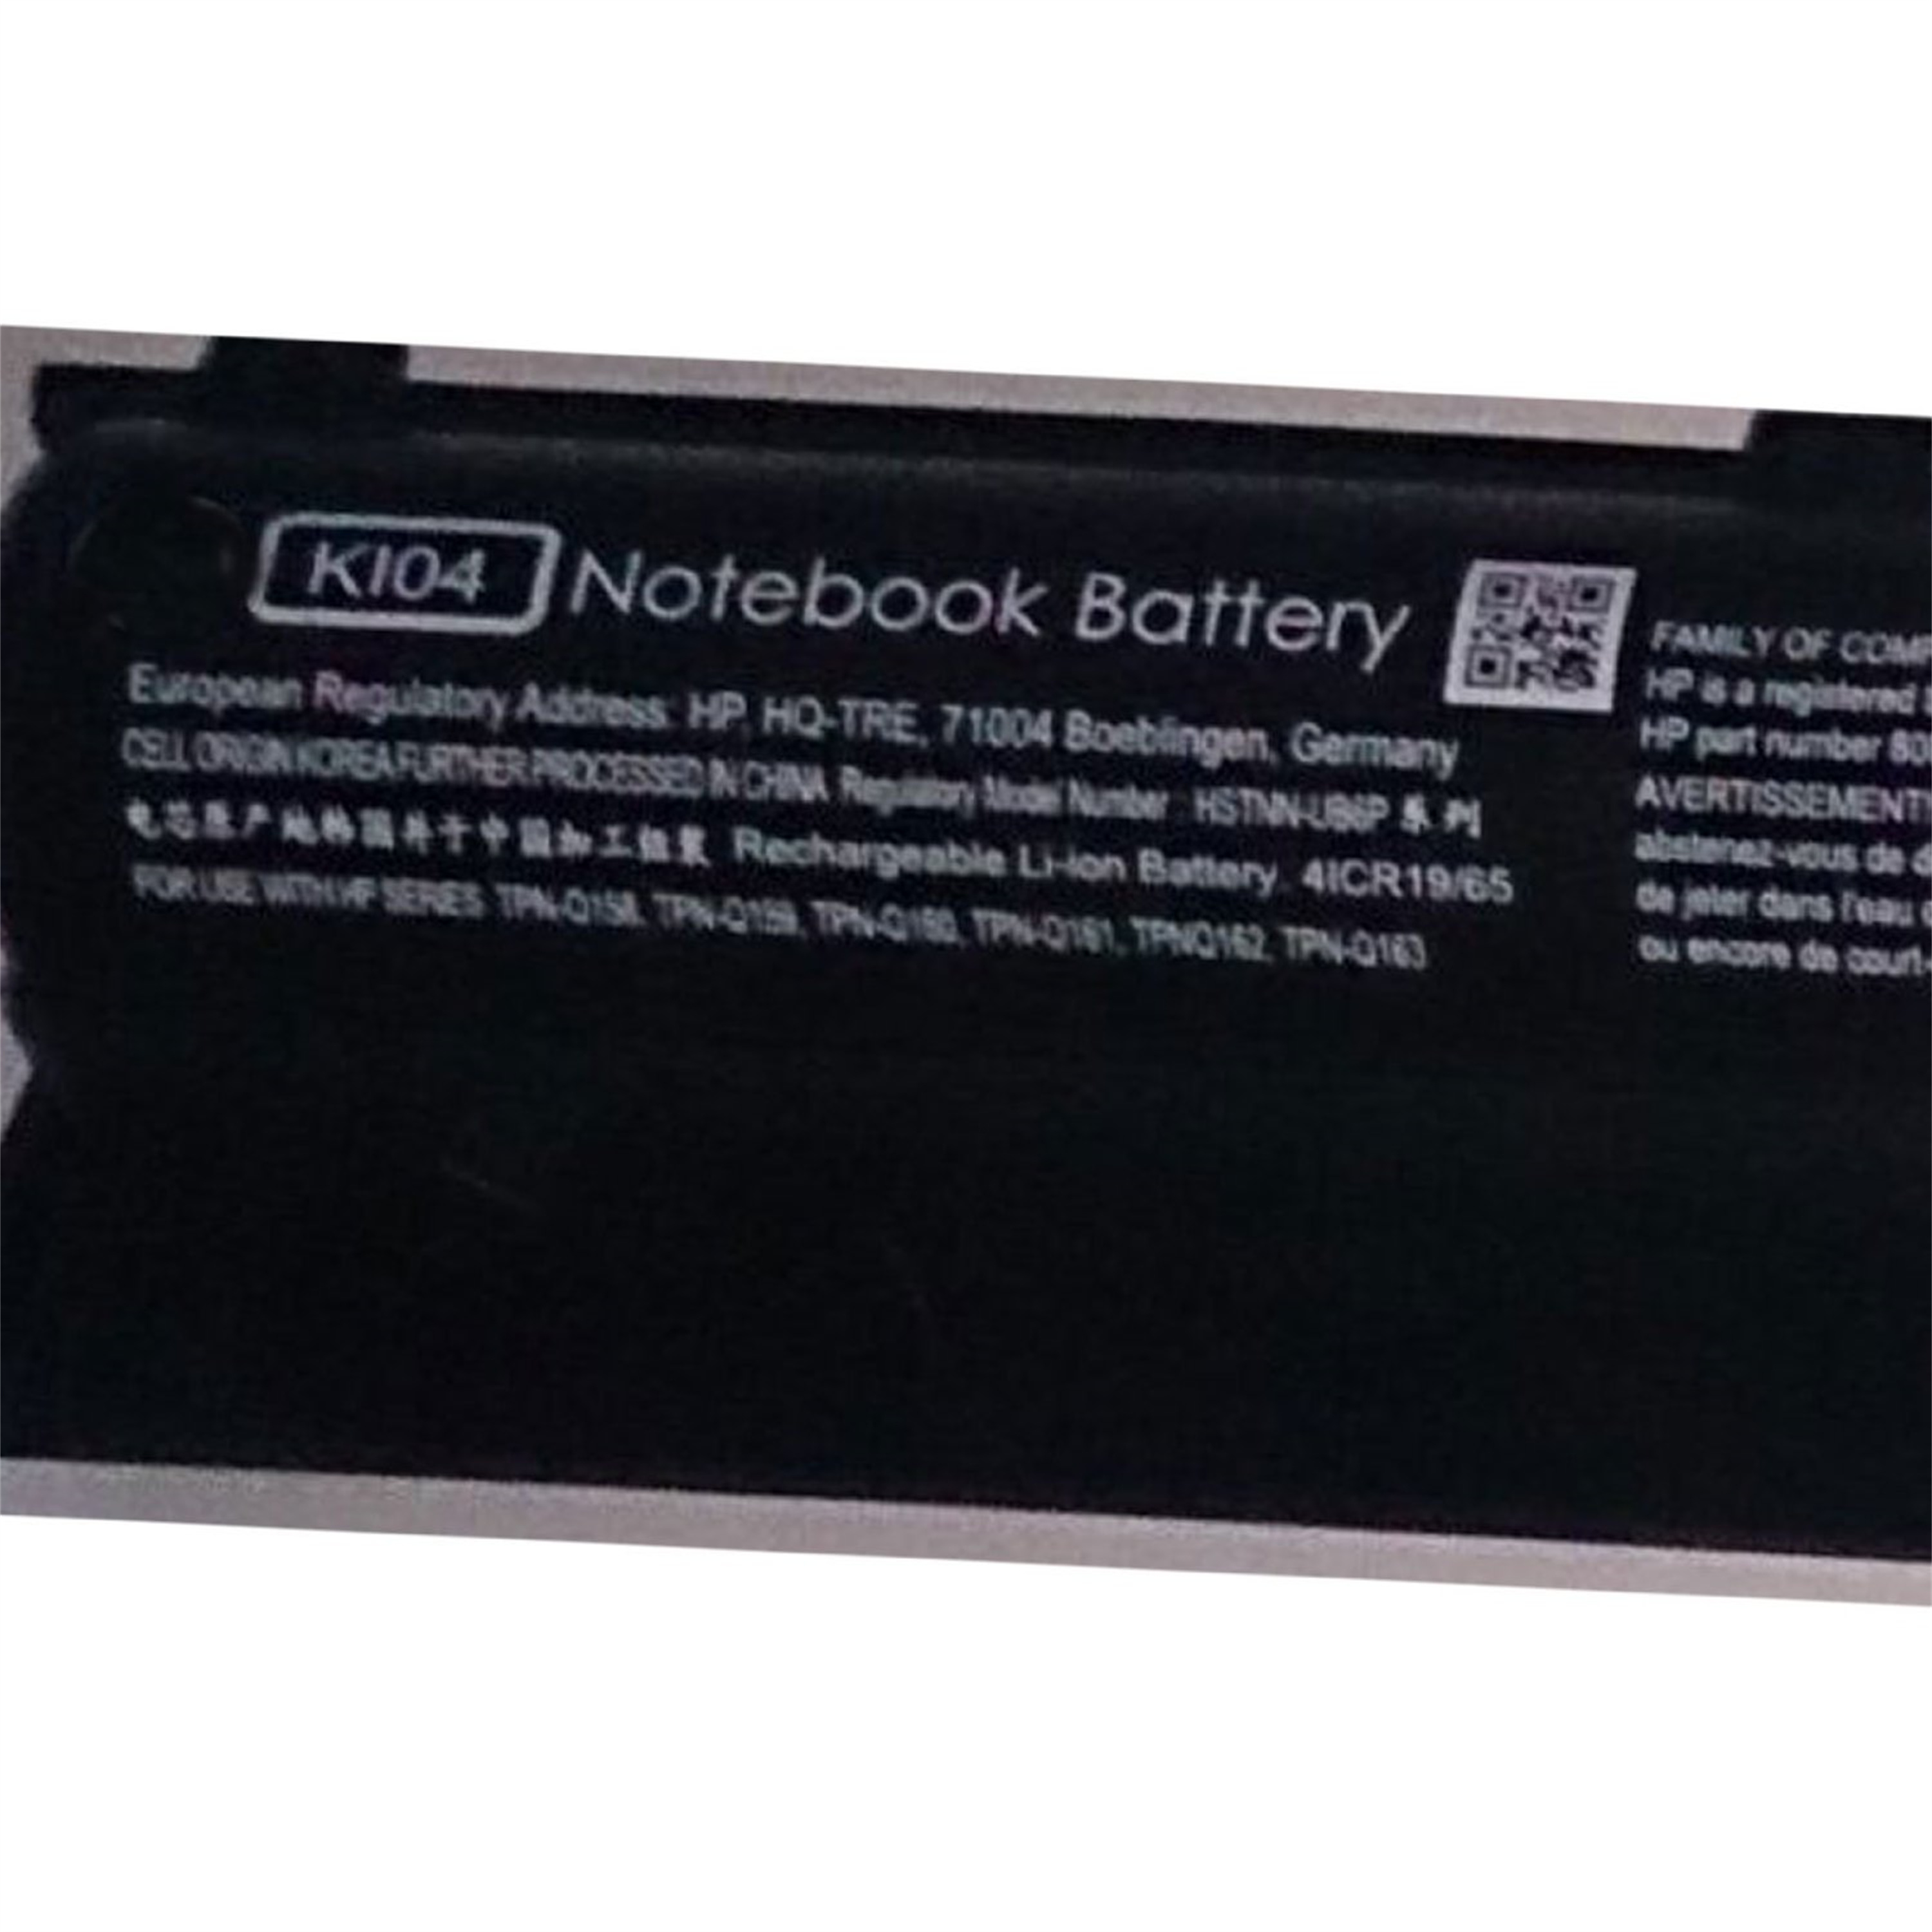 KI04 rechargeable lithium ion Notebook battery Laptop battery for HP Pavilion 14-ab000 15-ab000 17-g000 series 800049-001 HSTNN-LB6S/DB6T 14.8V 33WH